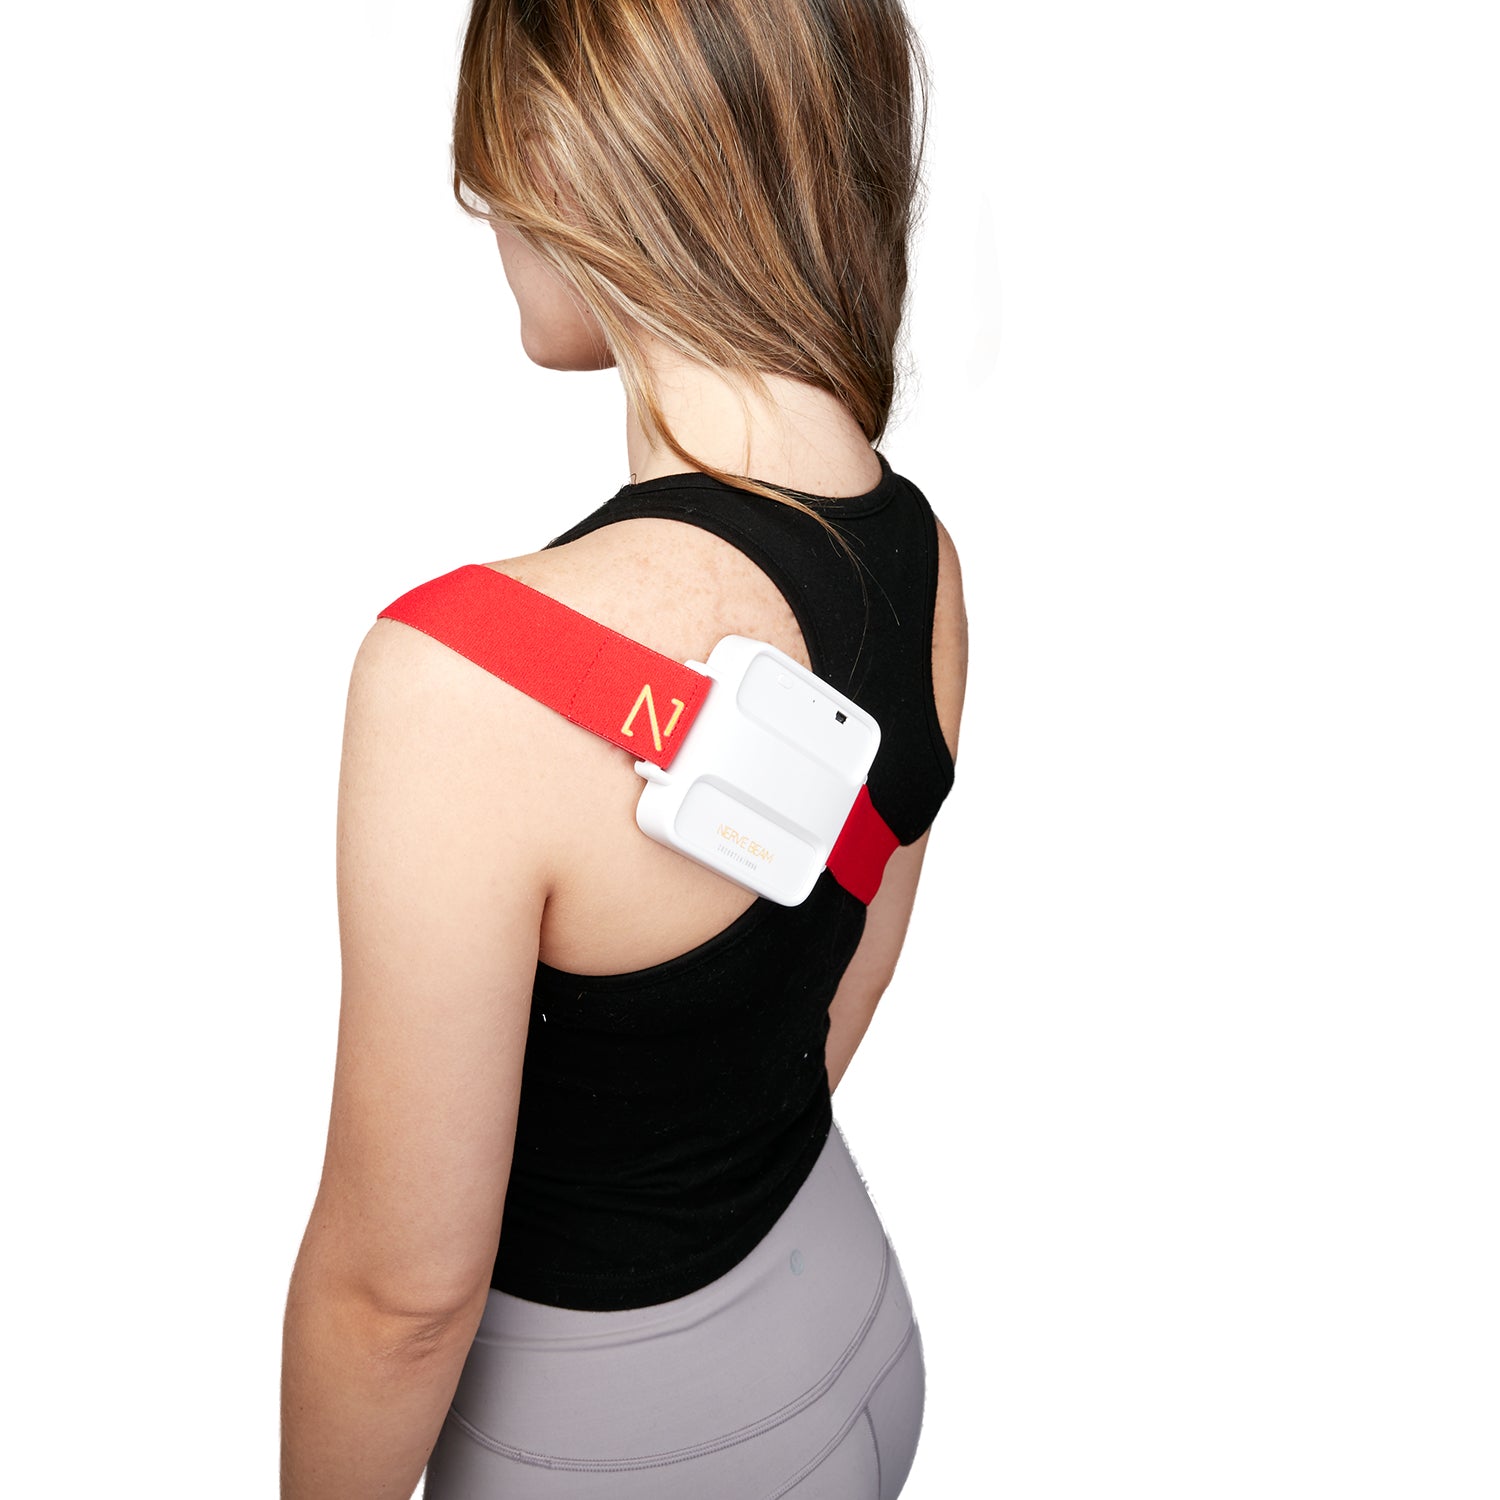 infrared device for pain